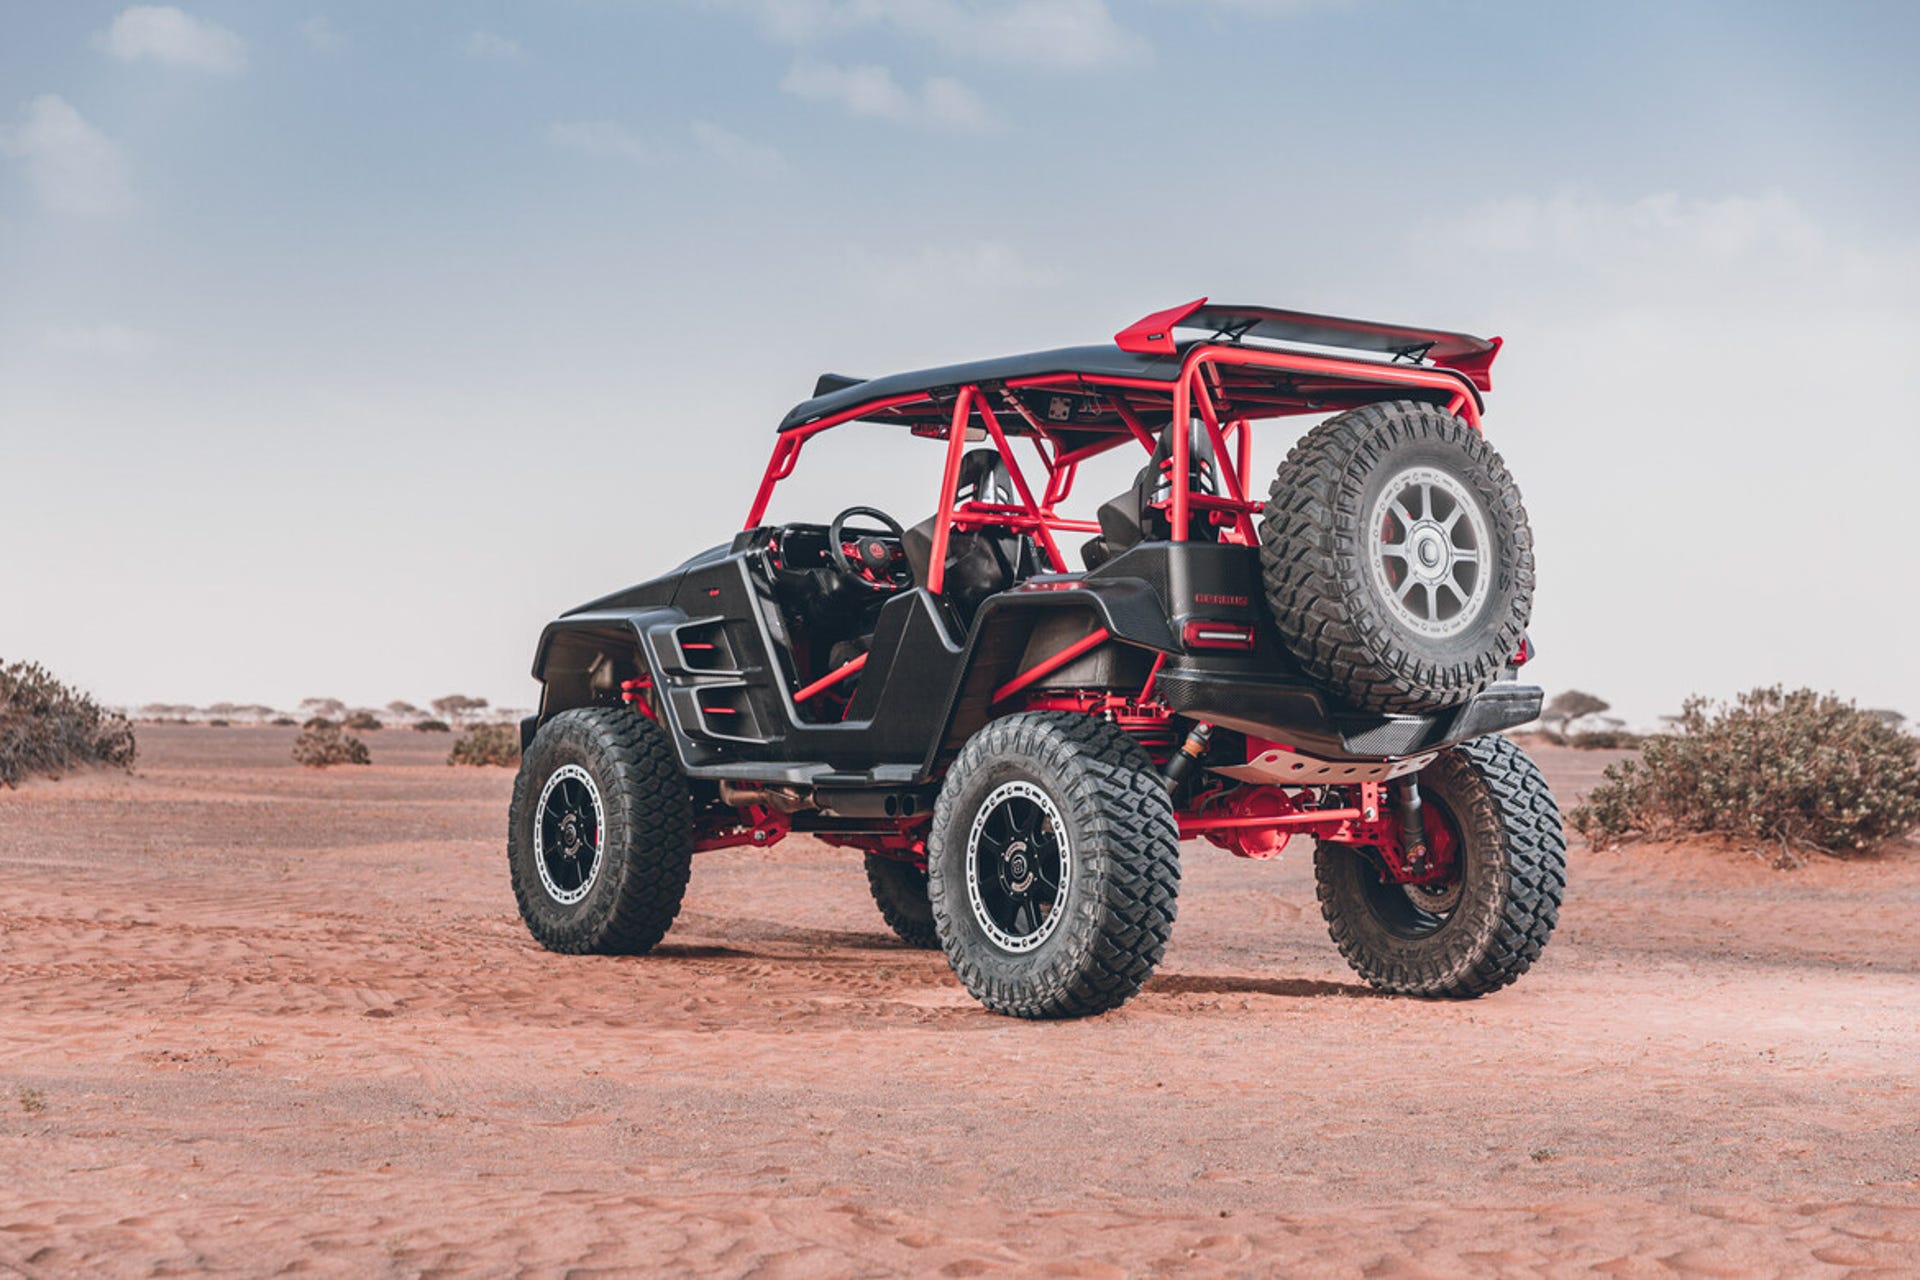 Brabus Crawler Dune Buggy parked in the desert from a rear three quarters view